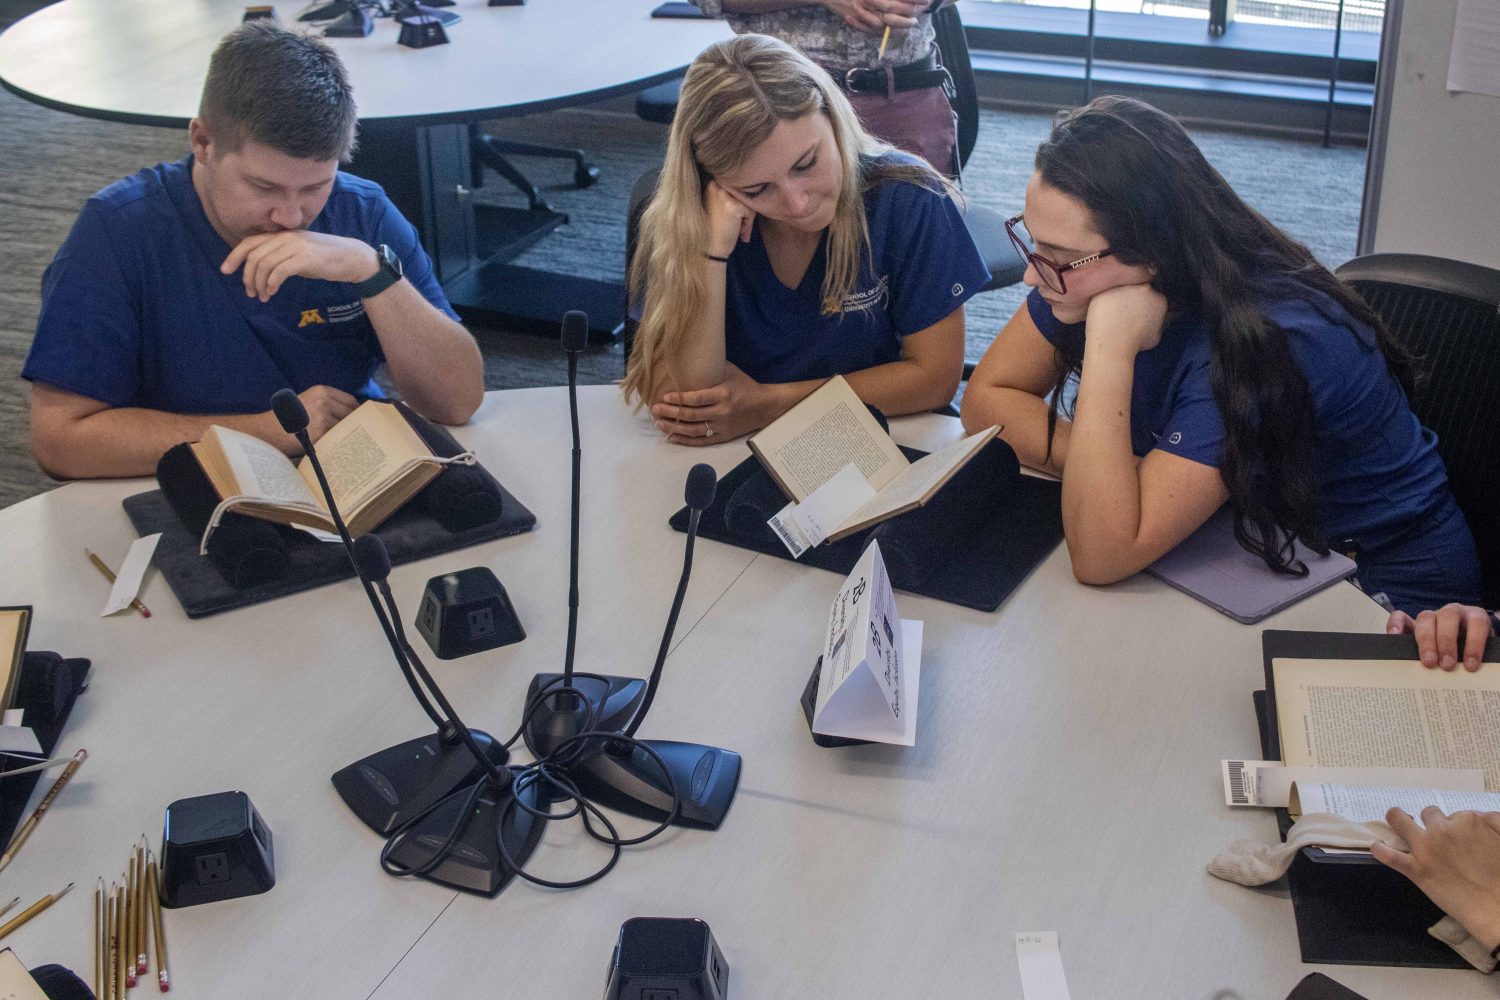 First year dental students read primary documents relating to the history of dentistry. (Photo/Adria Carpenter)